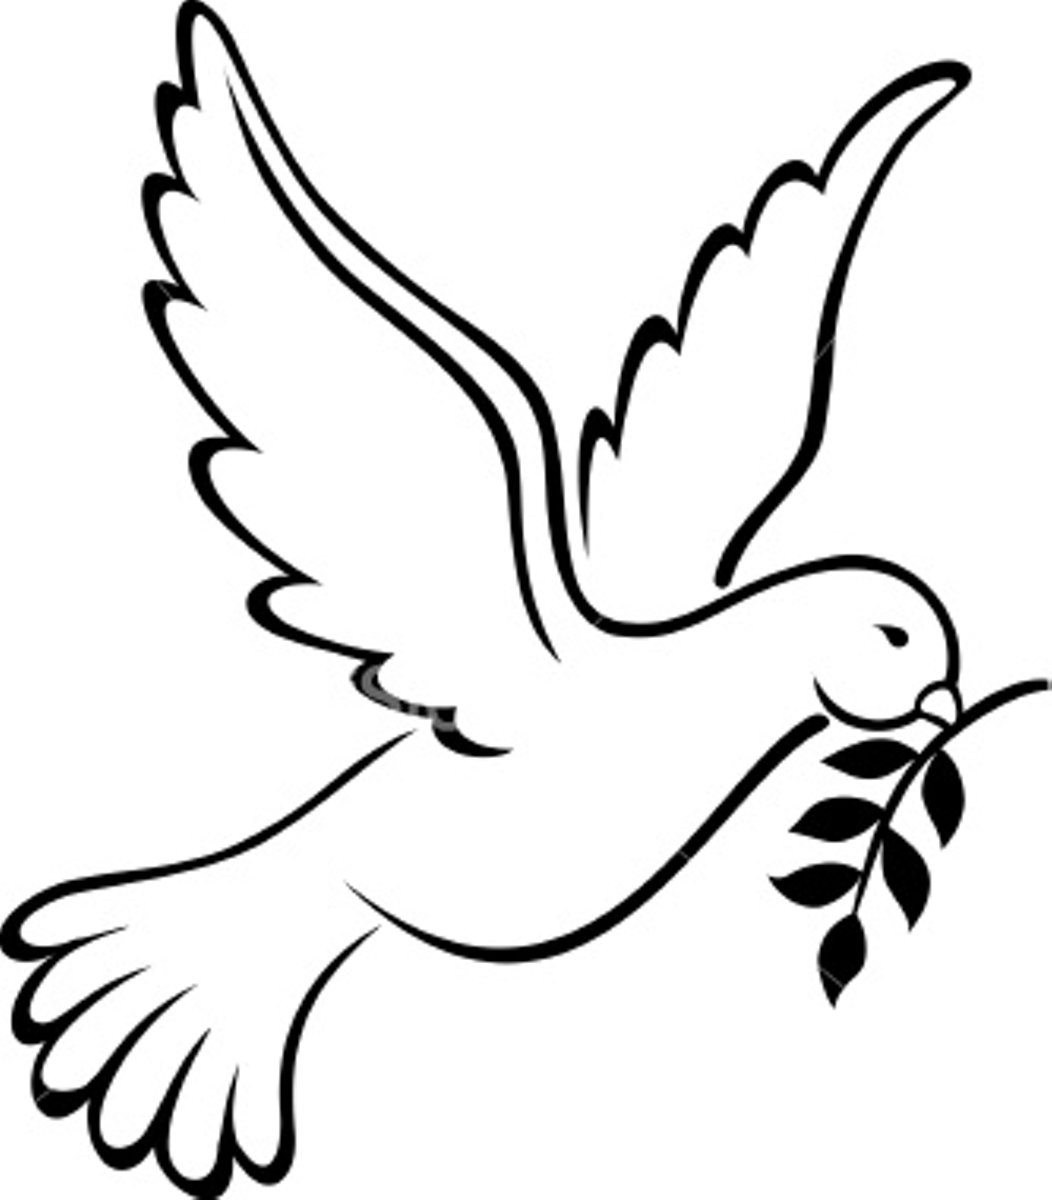 Peace Line Drawings - ClipArt Best